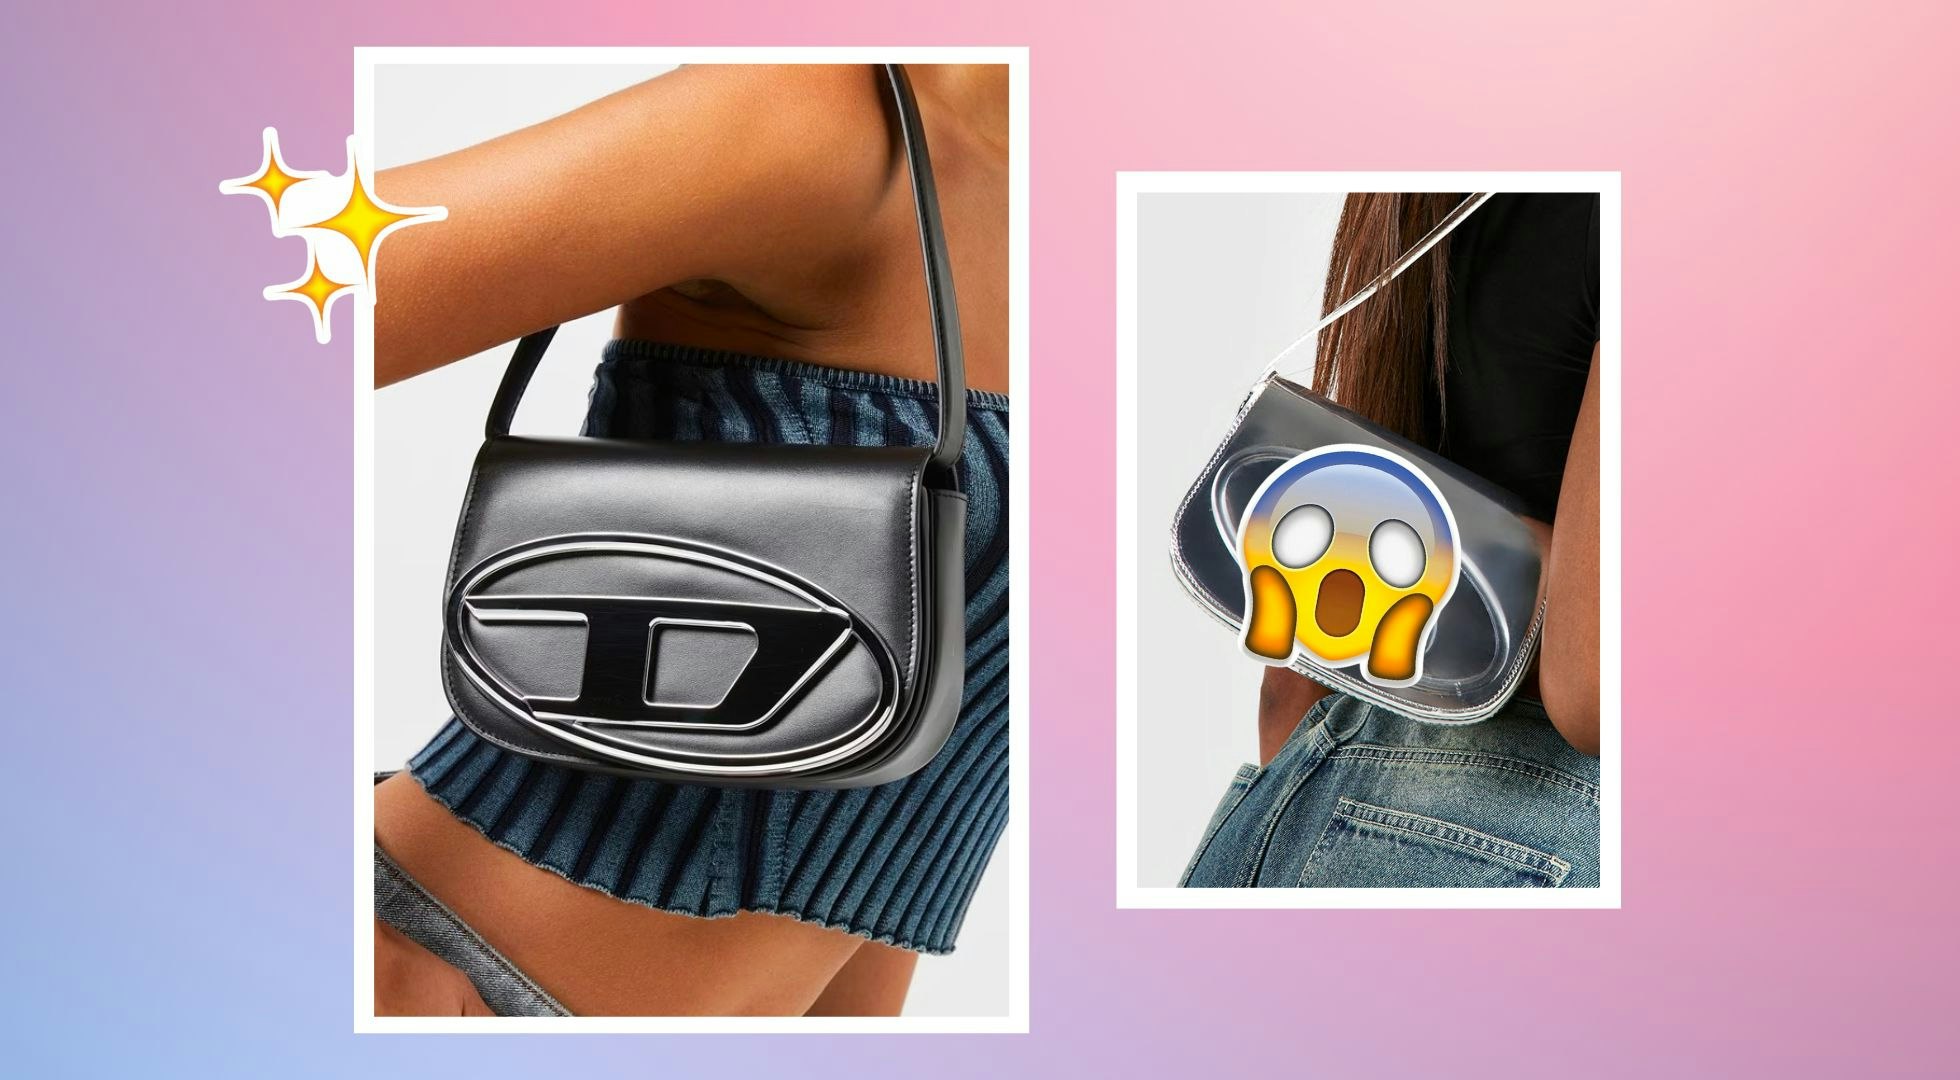 Diesel's 1DR Bag Is Now The Hottest Product In The World